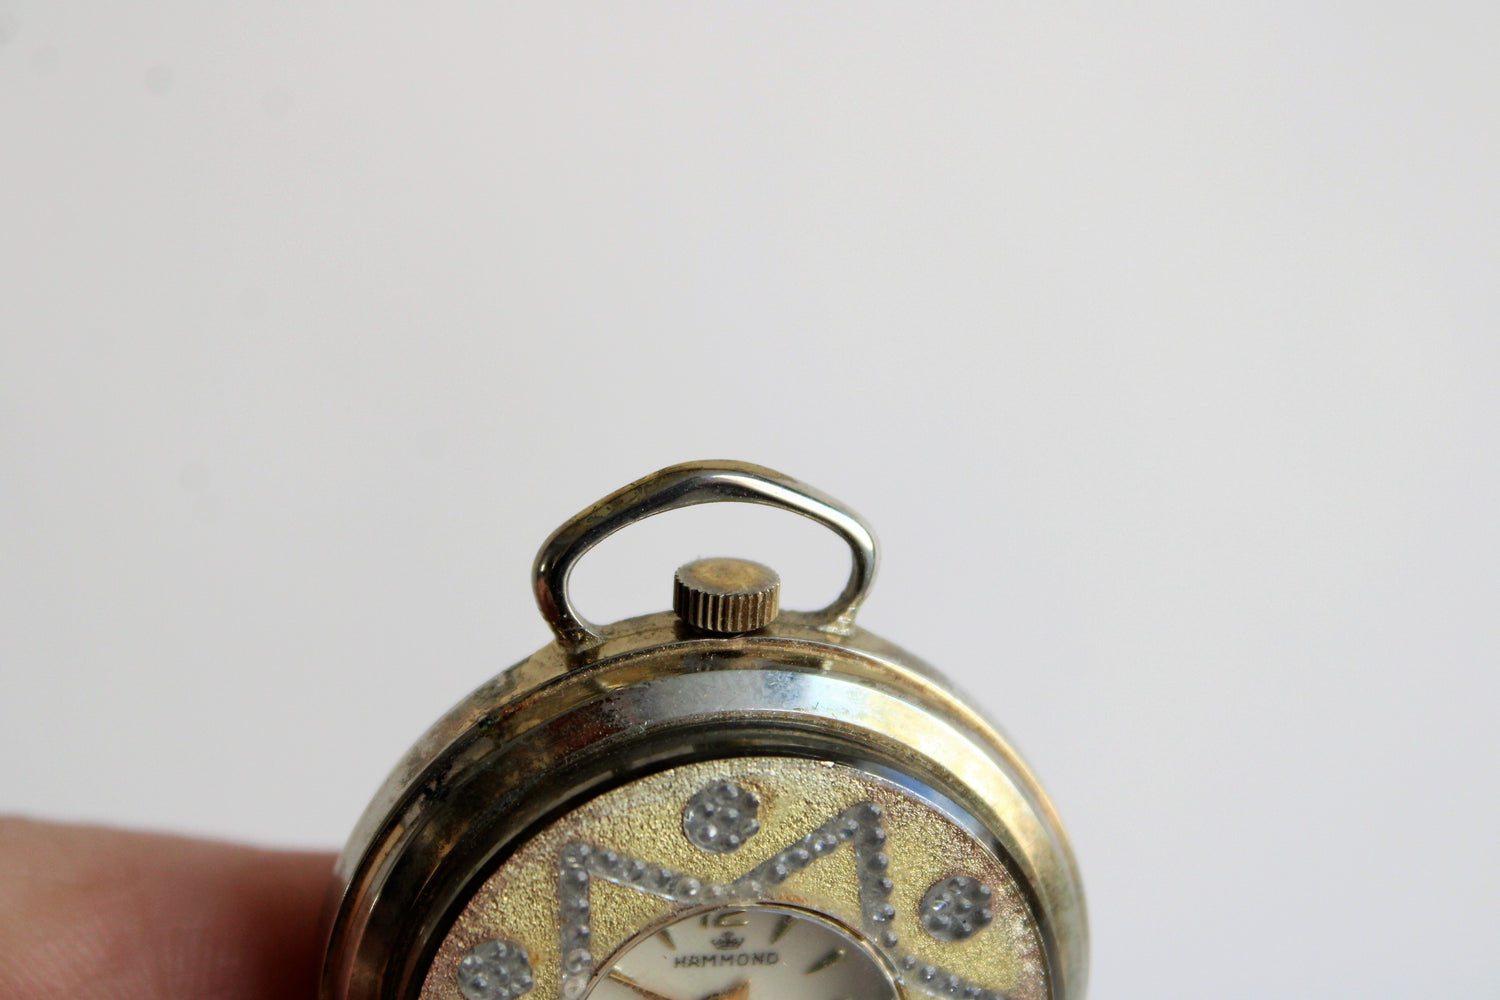 Vintage 1940s Woman's Pocket or Pendant Watch